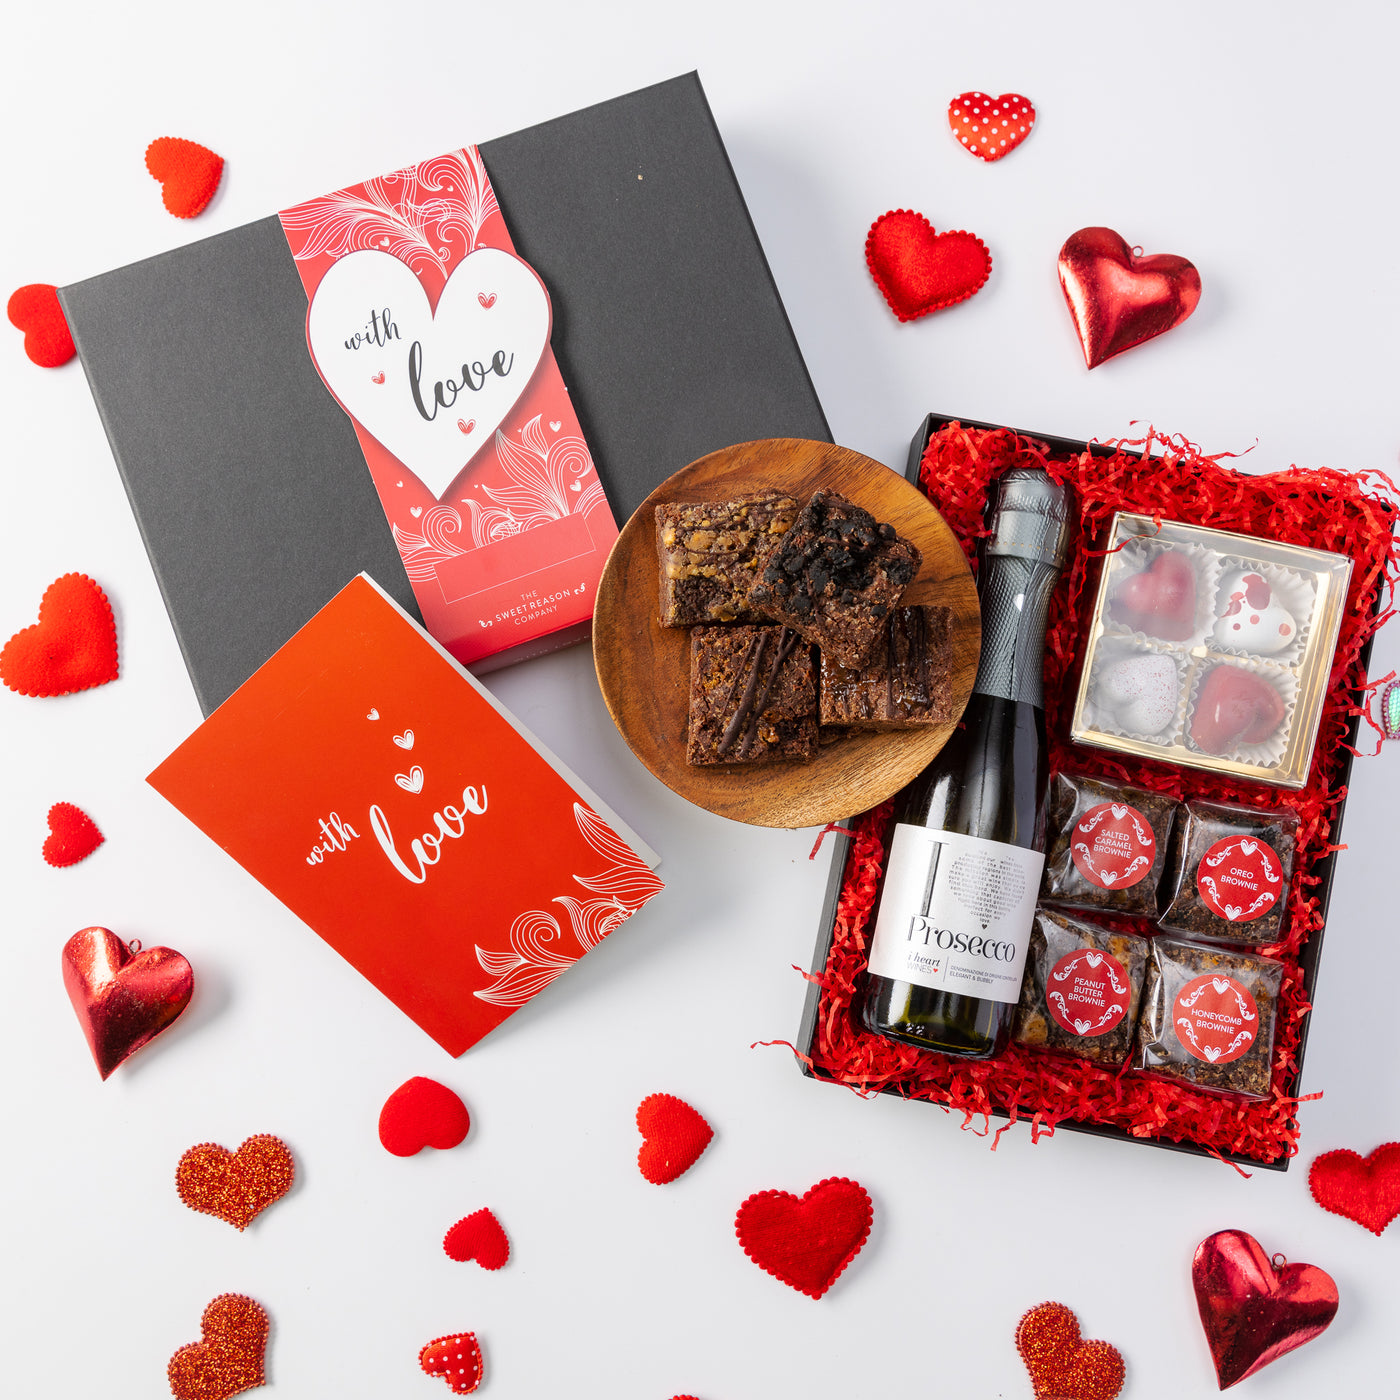 'With Love' Chocolates, Brownies and Prosecco Valentine's Day Gift Box